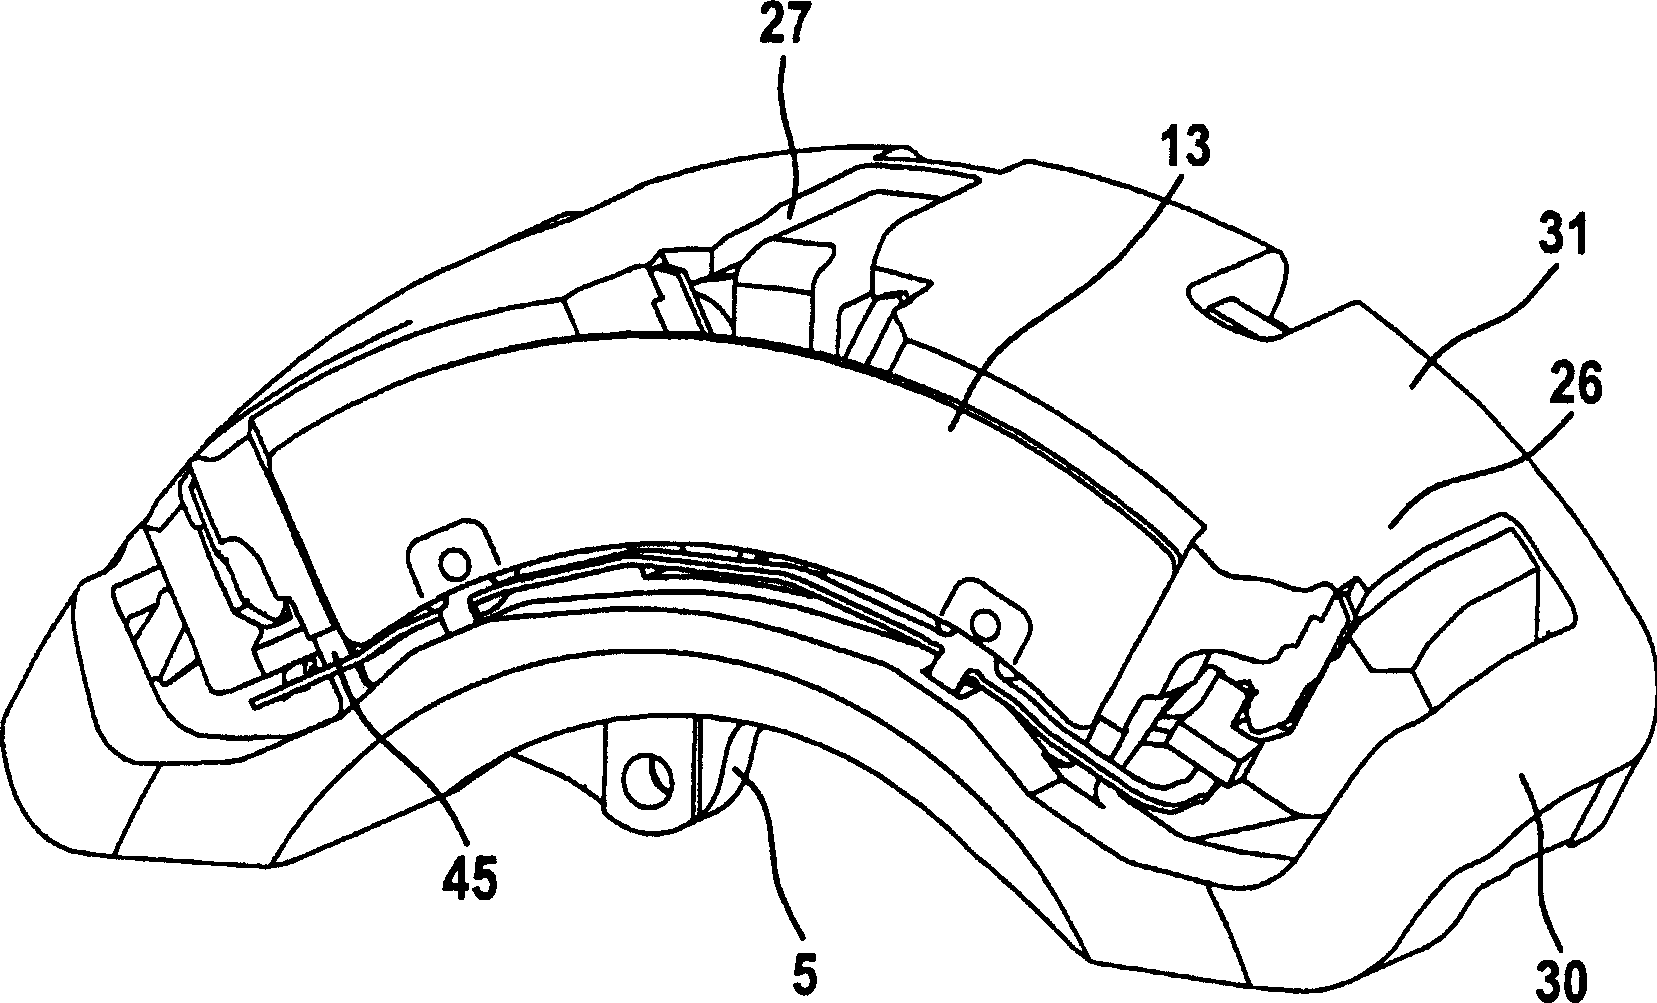 Disc brake equipped with a floating caliper and several outer brake pads directly supported on the brake anchor plate